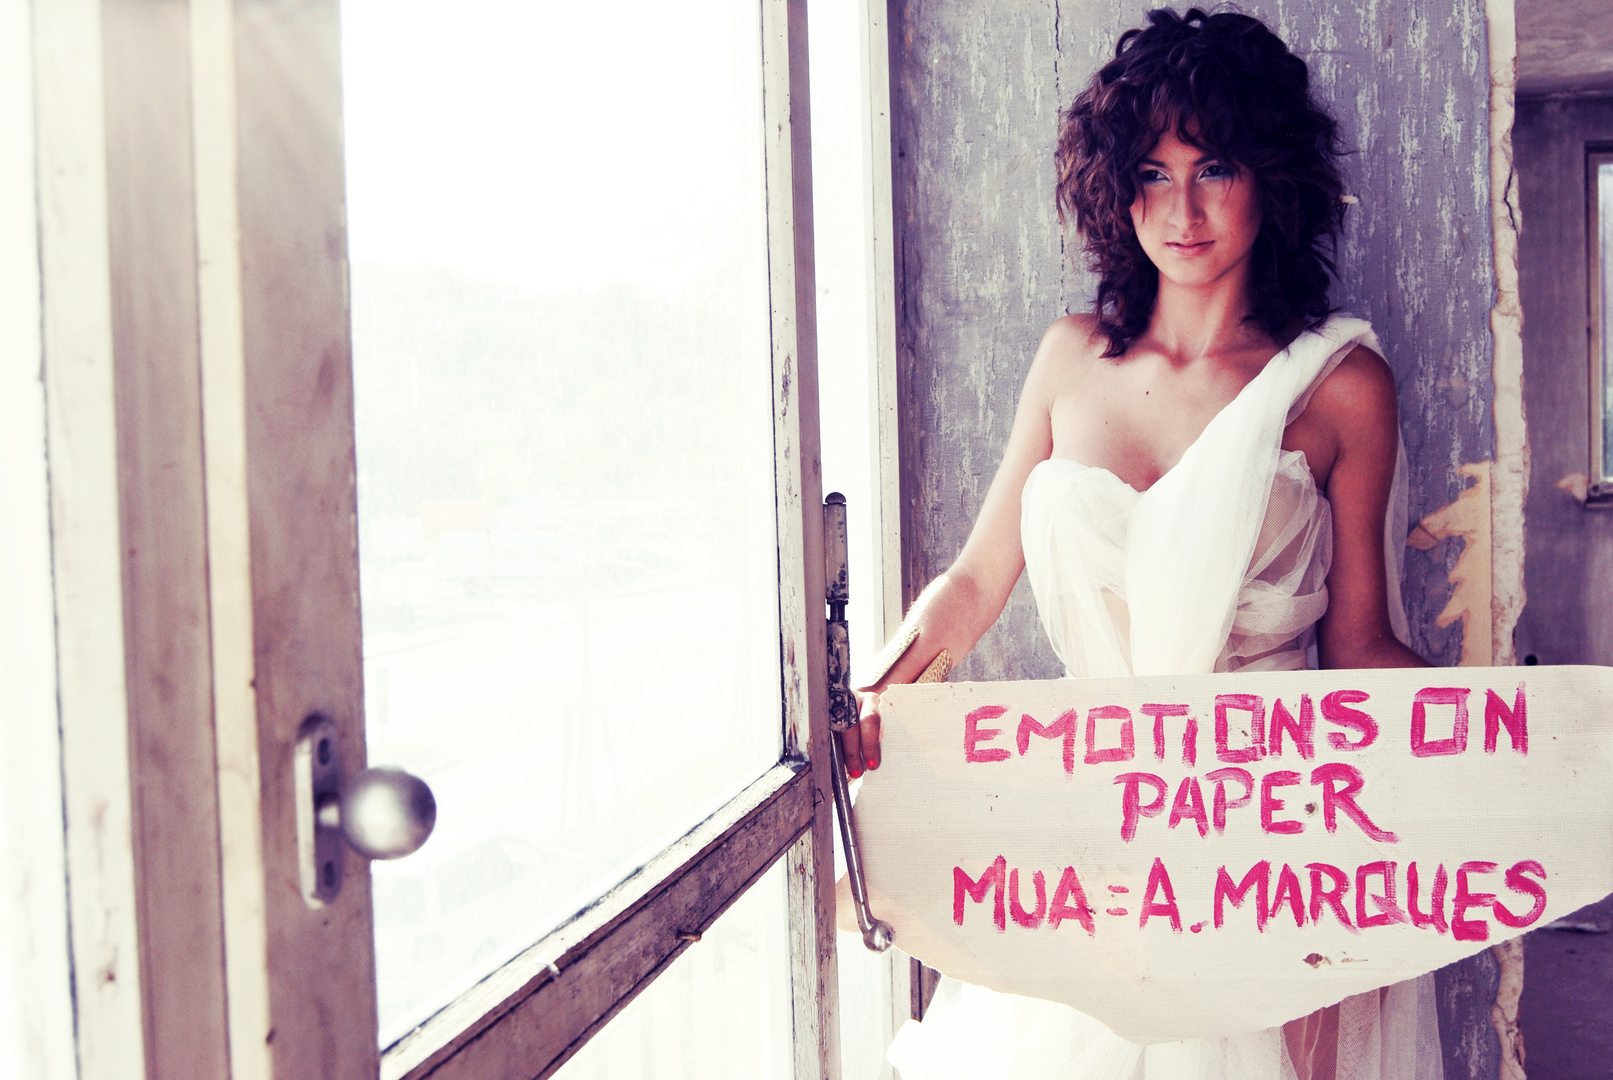 Emotions on Paper, Make up Artist Andreia Marques...